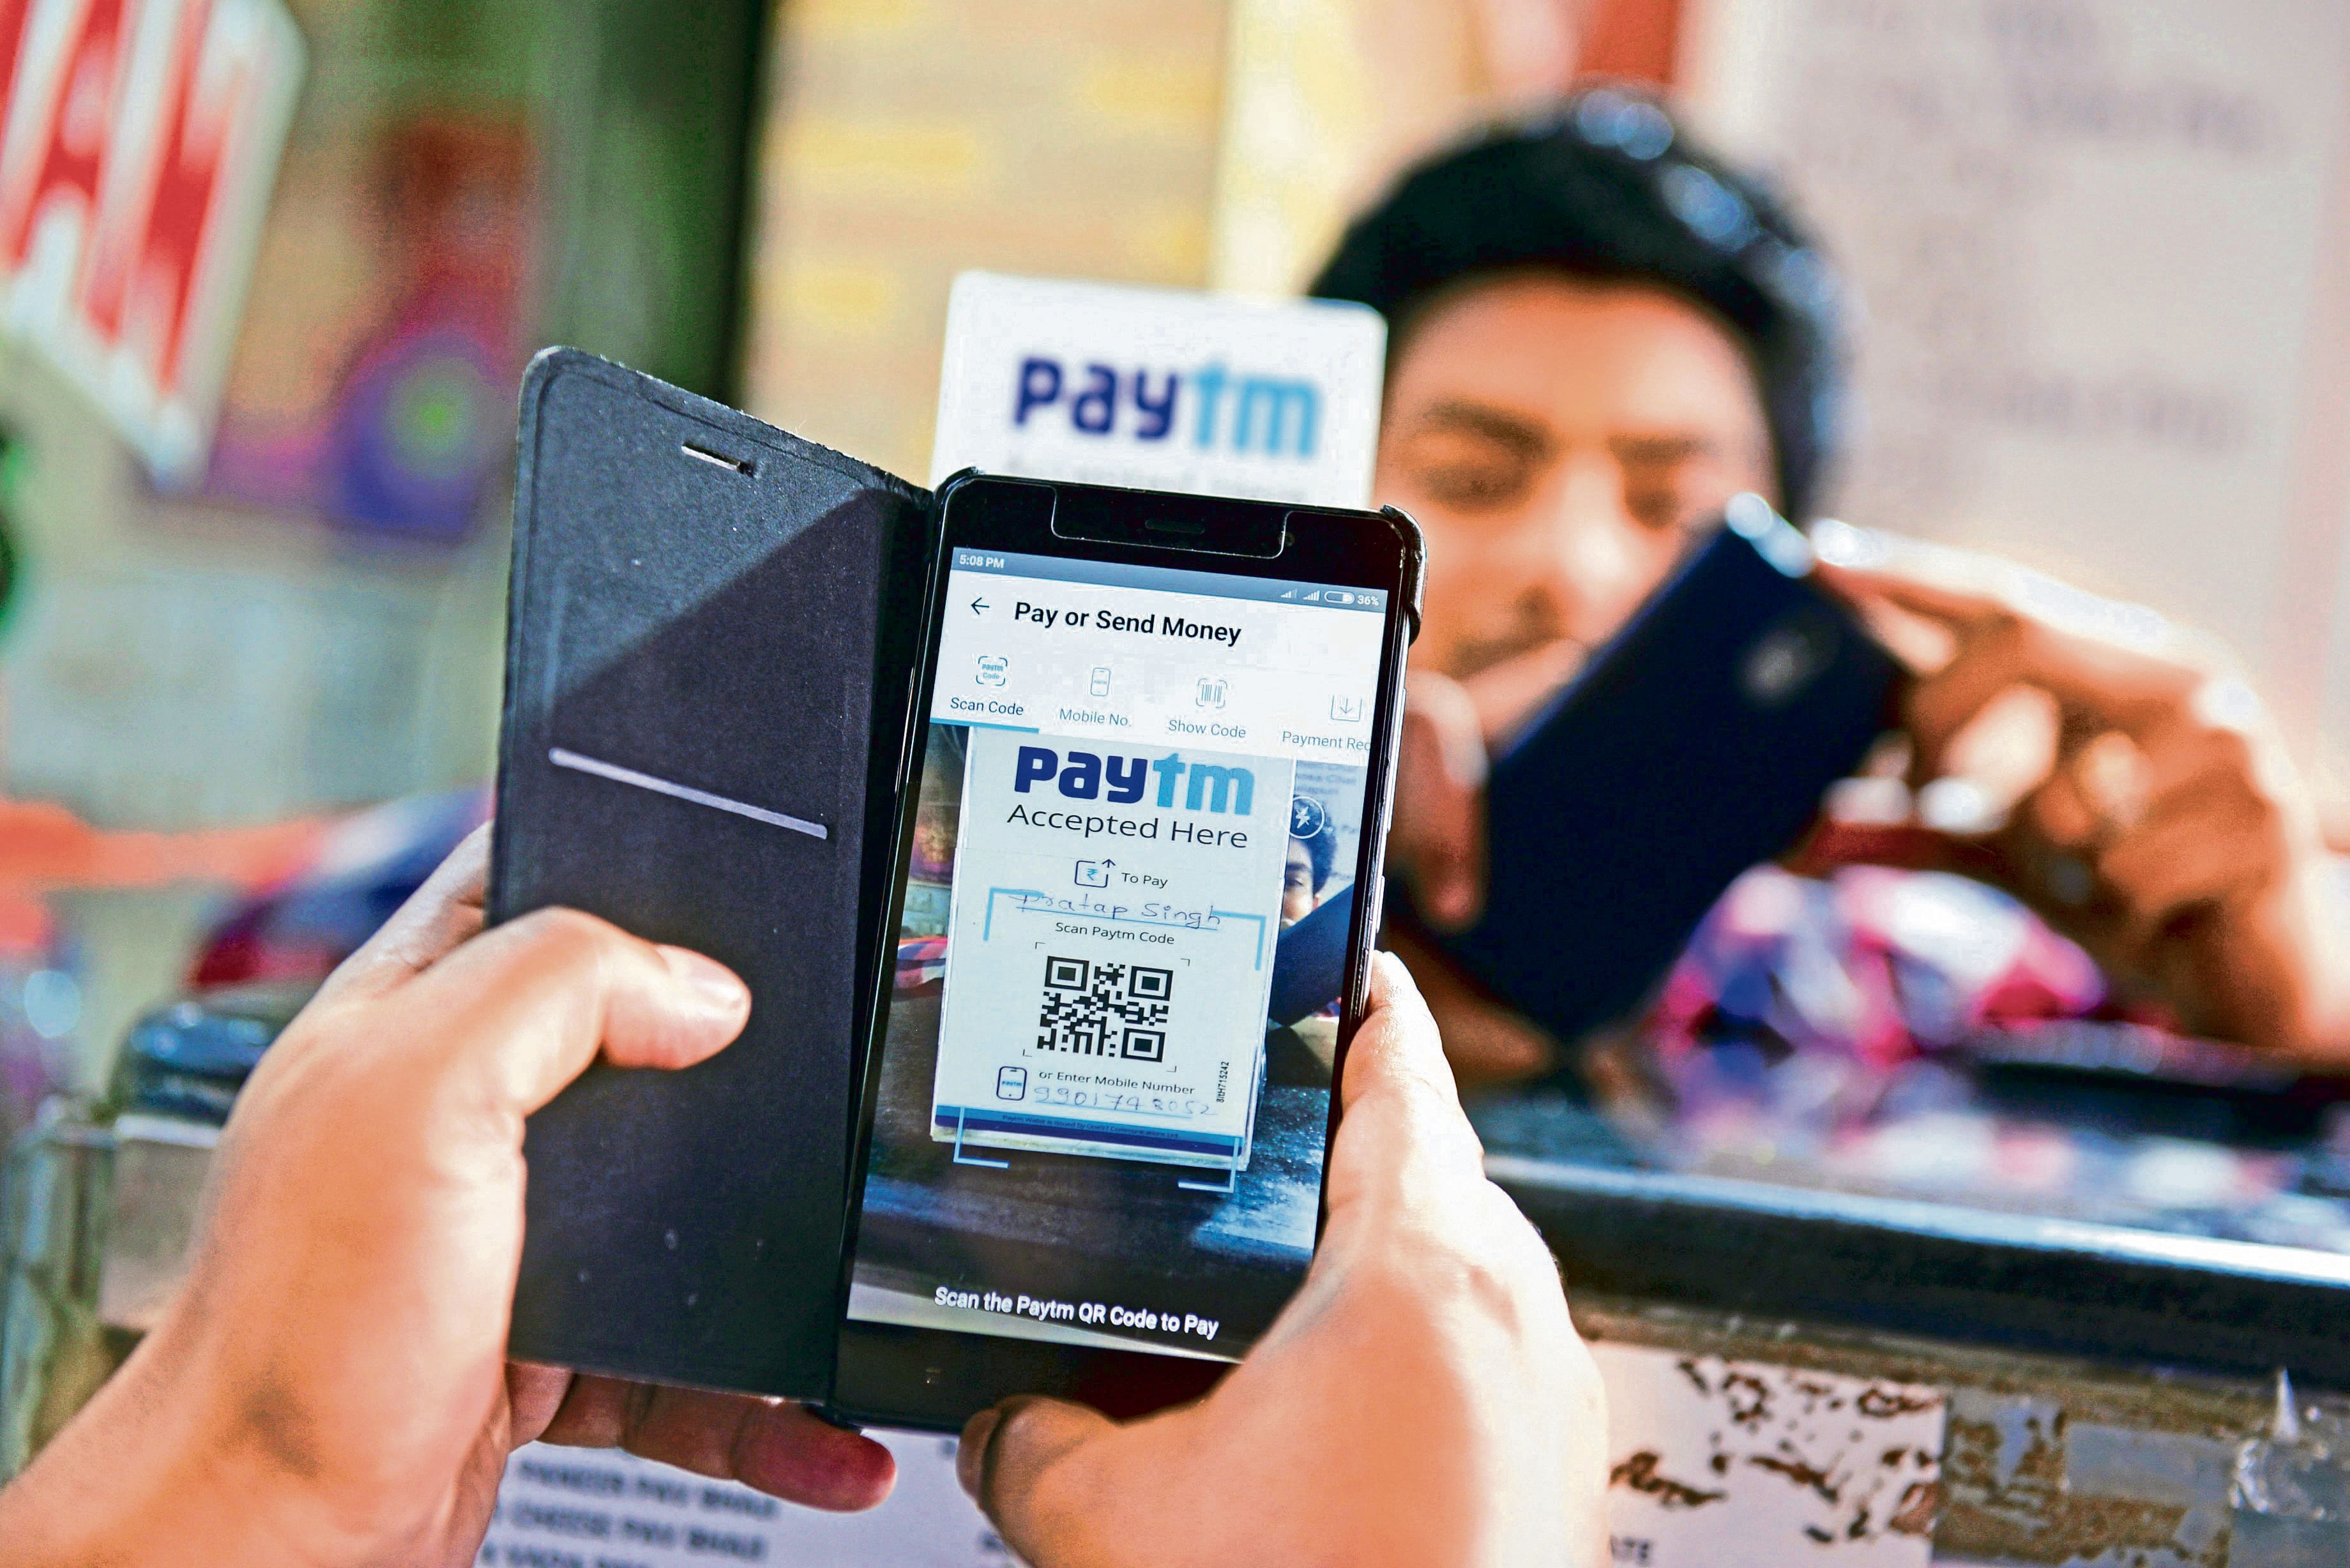 Paytm, made an initial public offer (IPO) of Rs18,300 crore in November 2021.